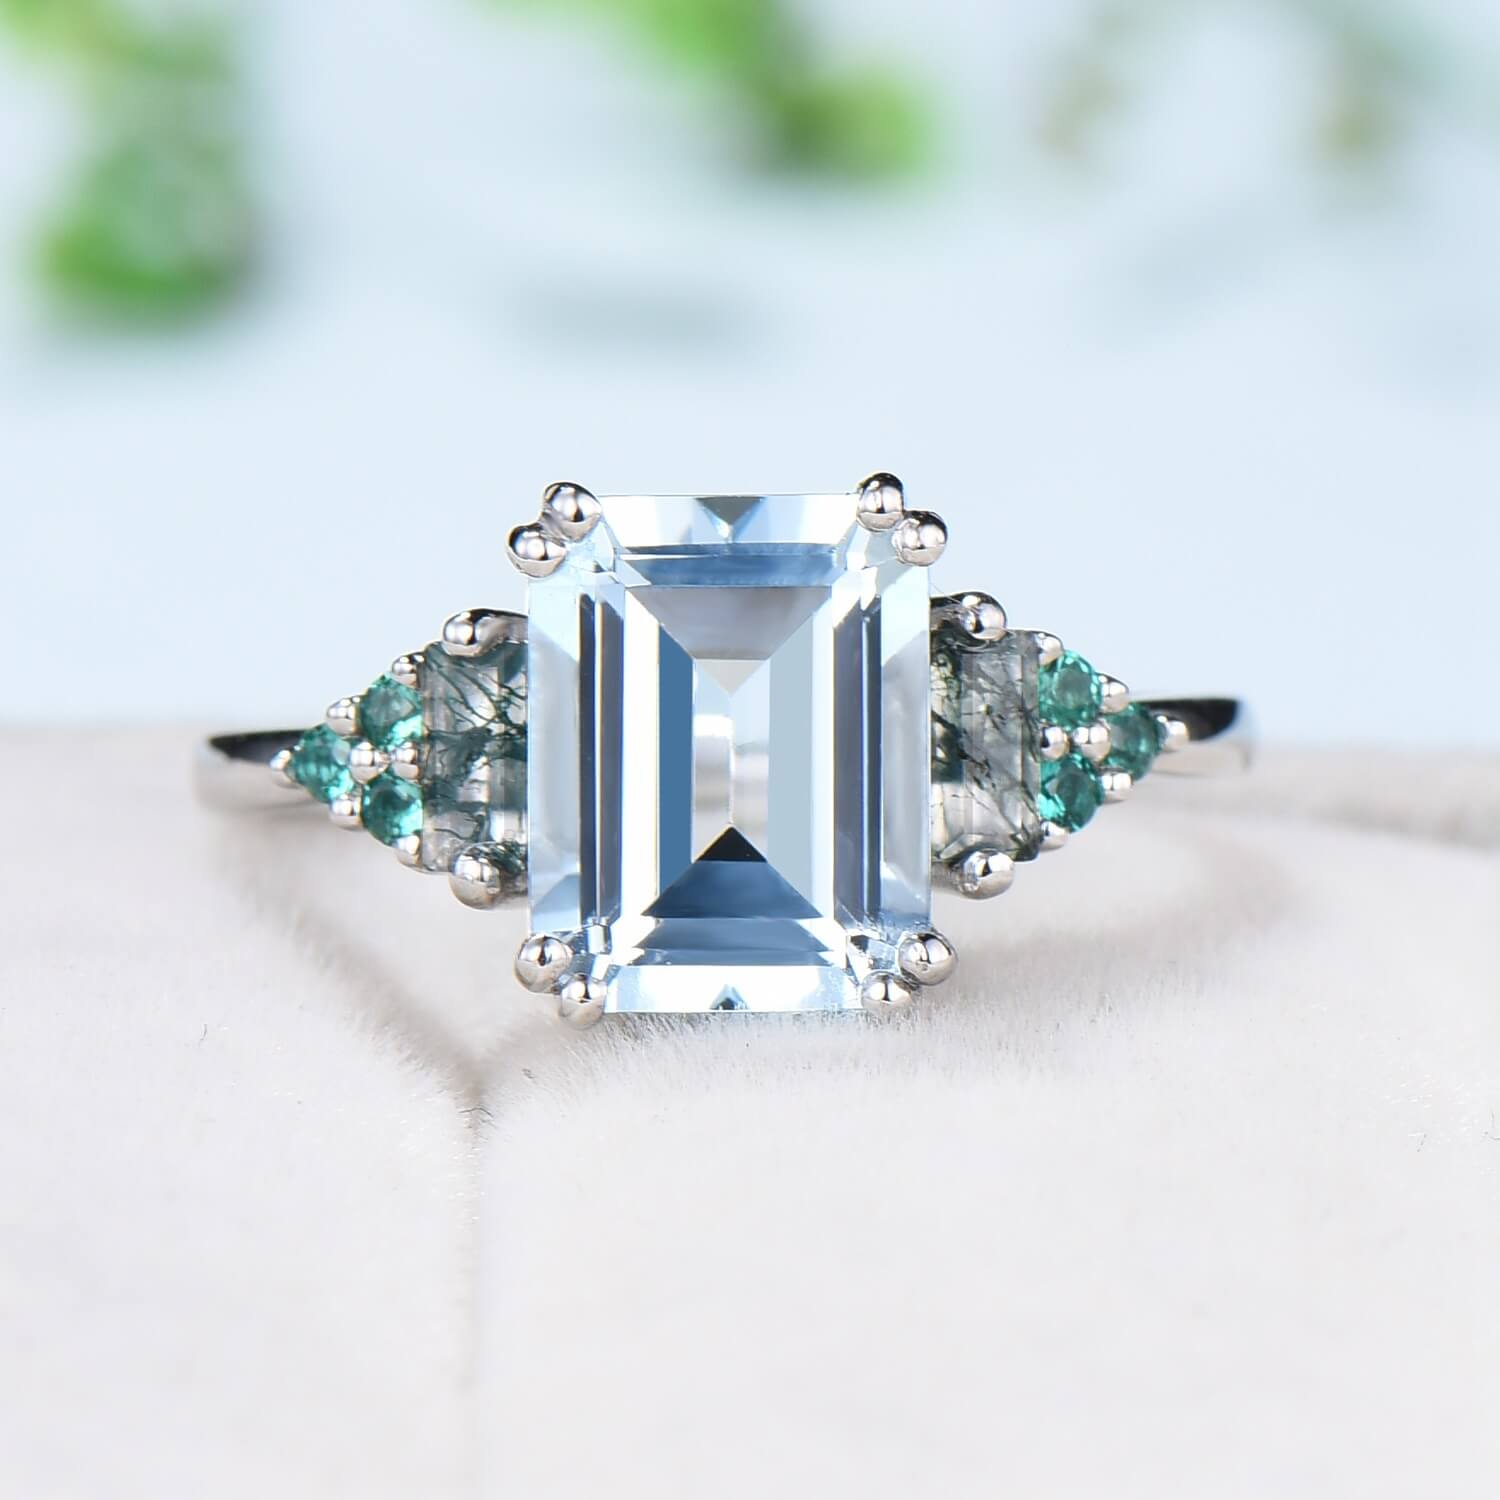 Vintage Emerald Cut Aquamarine Ring 8 Prongs Cluster Baguette Moss Agate Engagement Ring Unique March Birthstone Wedding Ring for Women - PENFINE